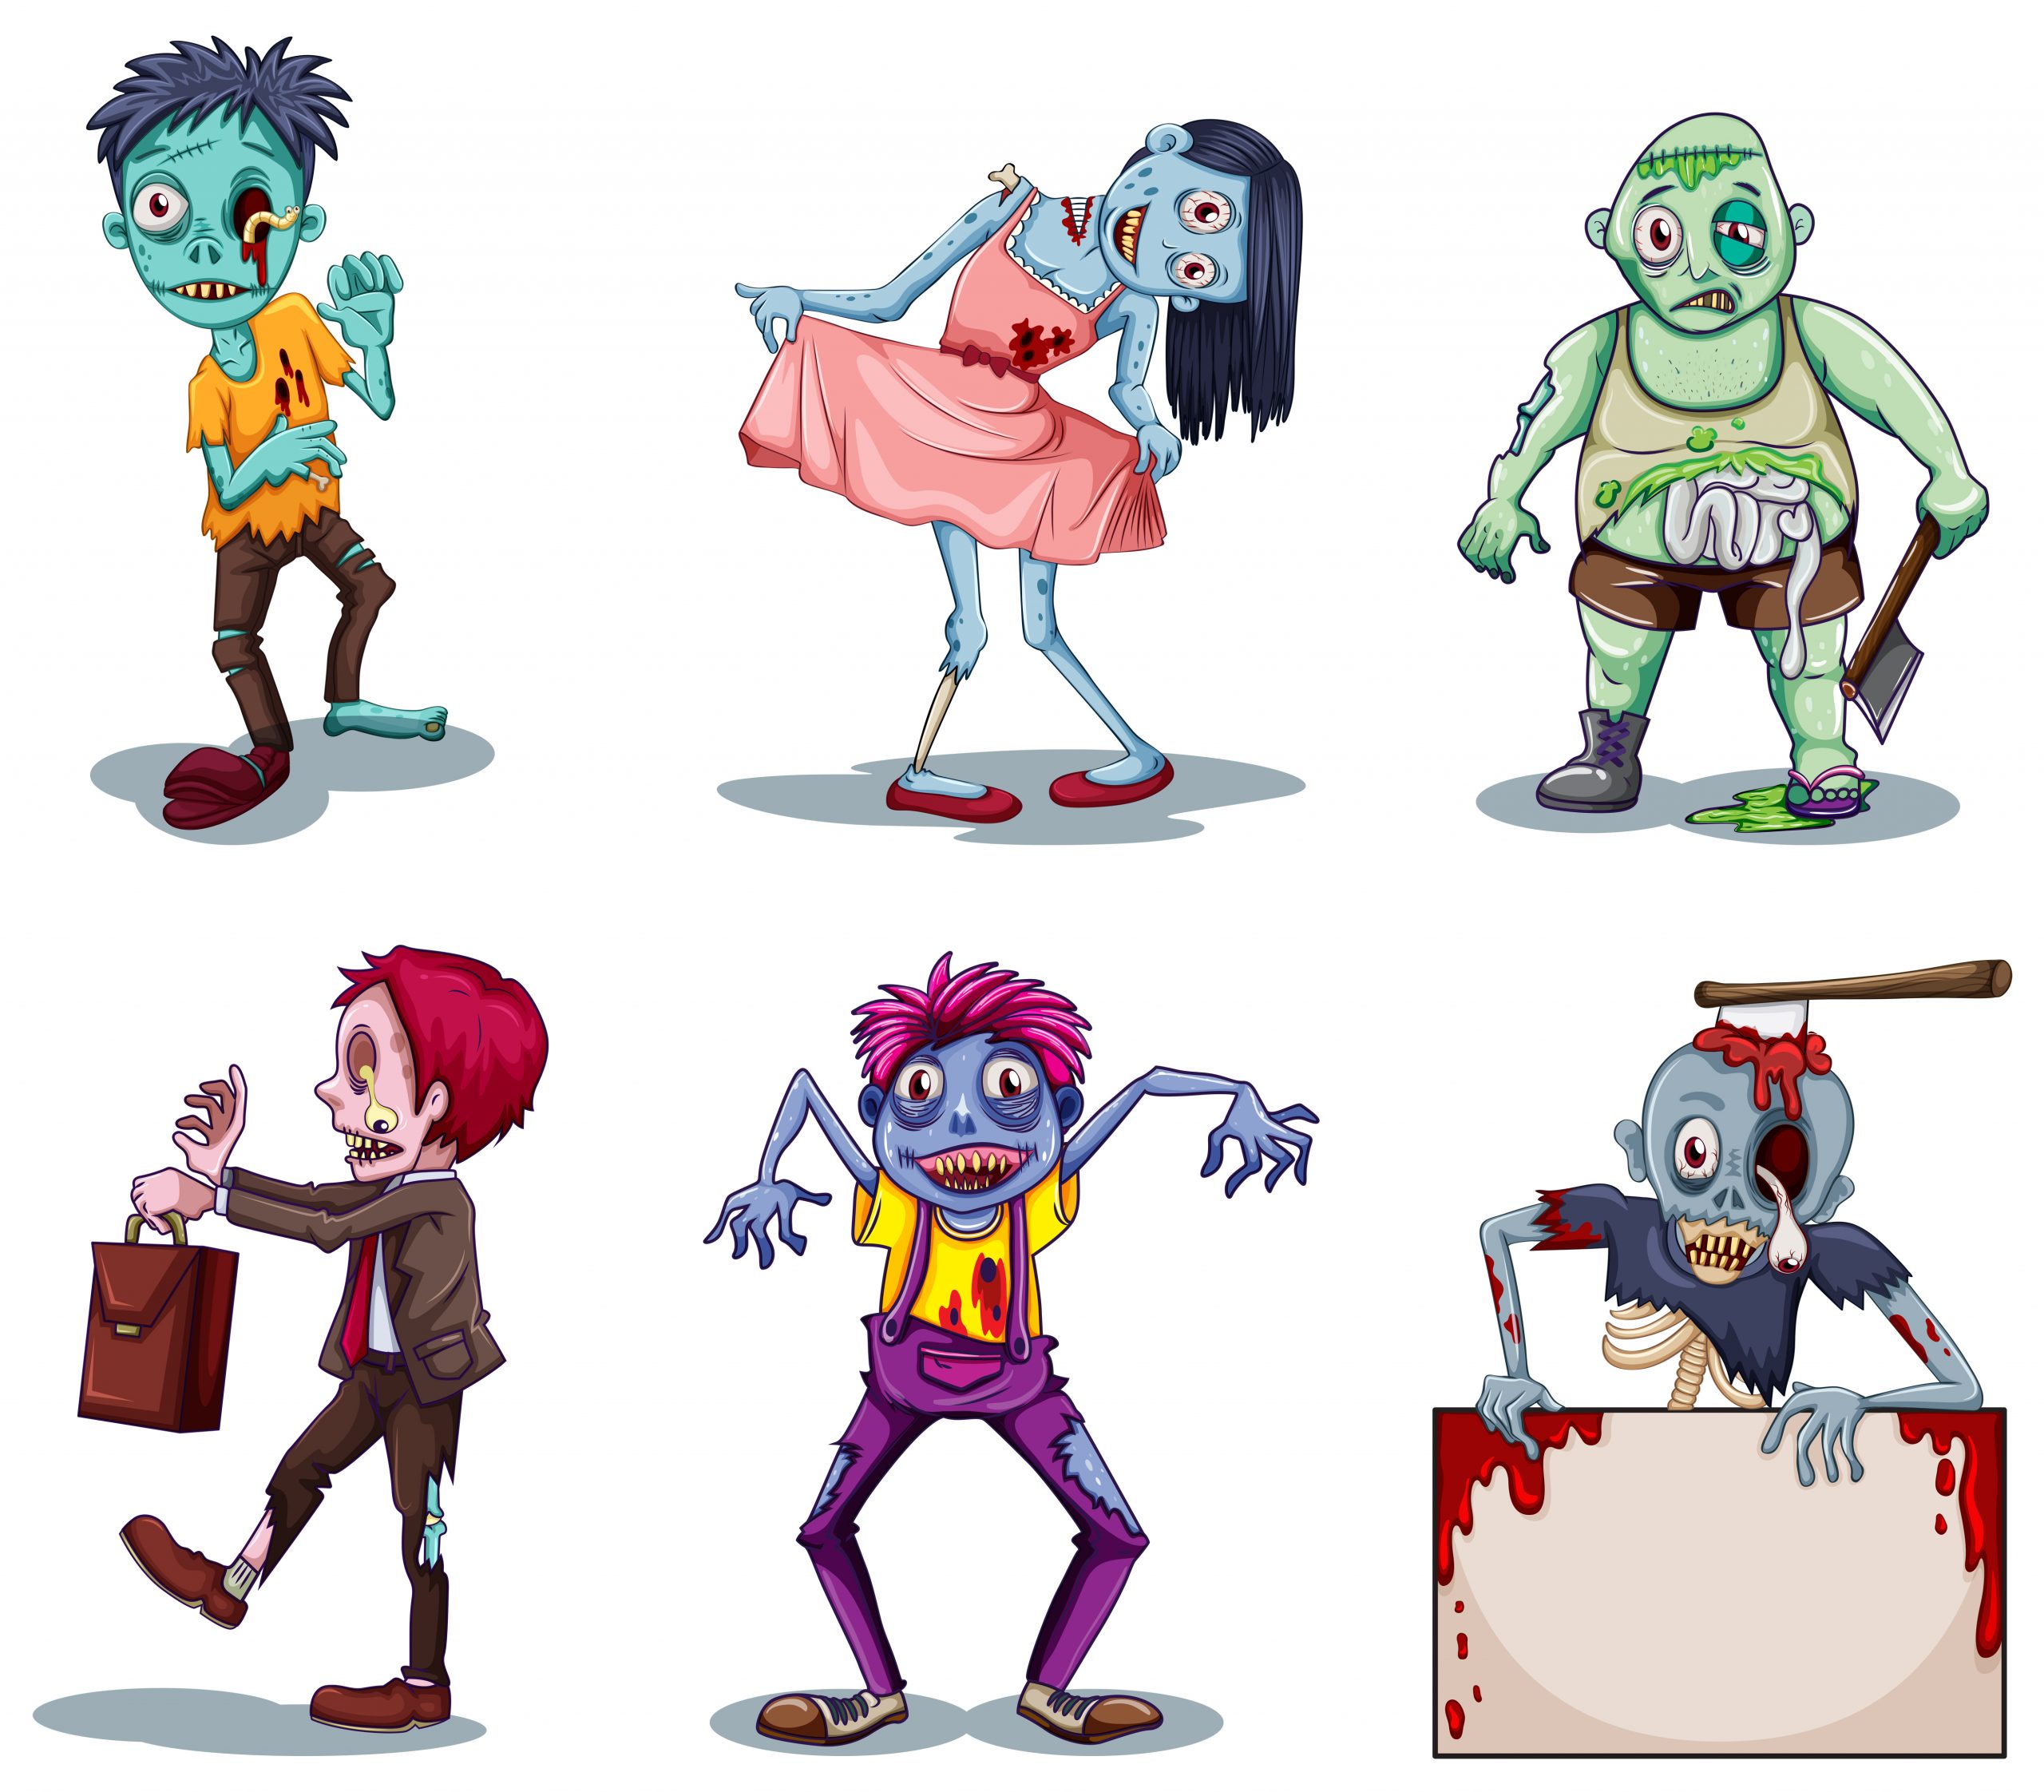 https://www.freepik.com/free-vector/lllustration-scary-zombies-white-background_1138536.htm#query=zombi&position=1